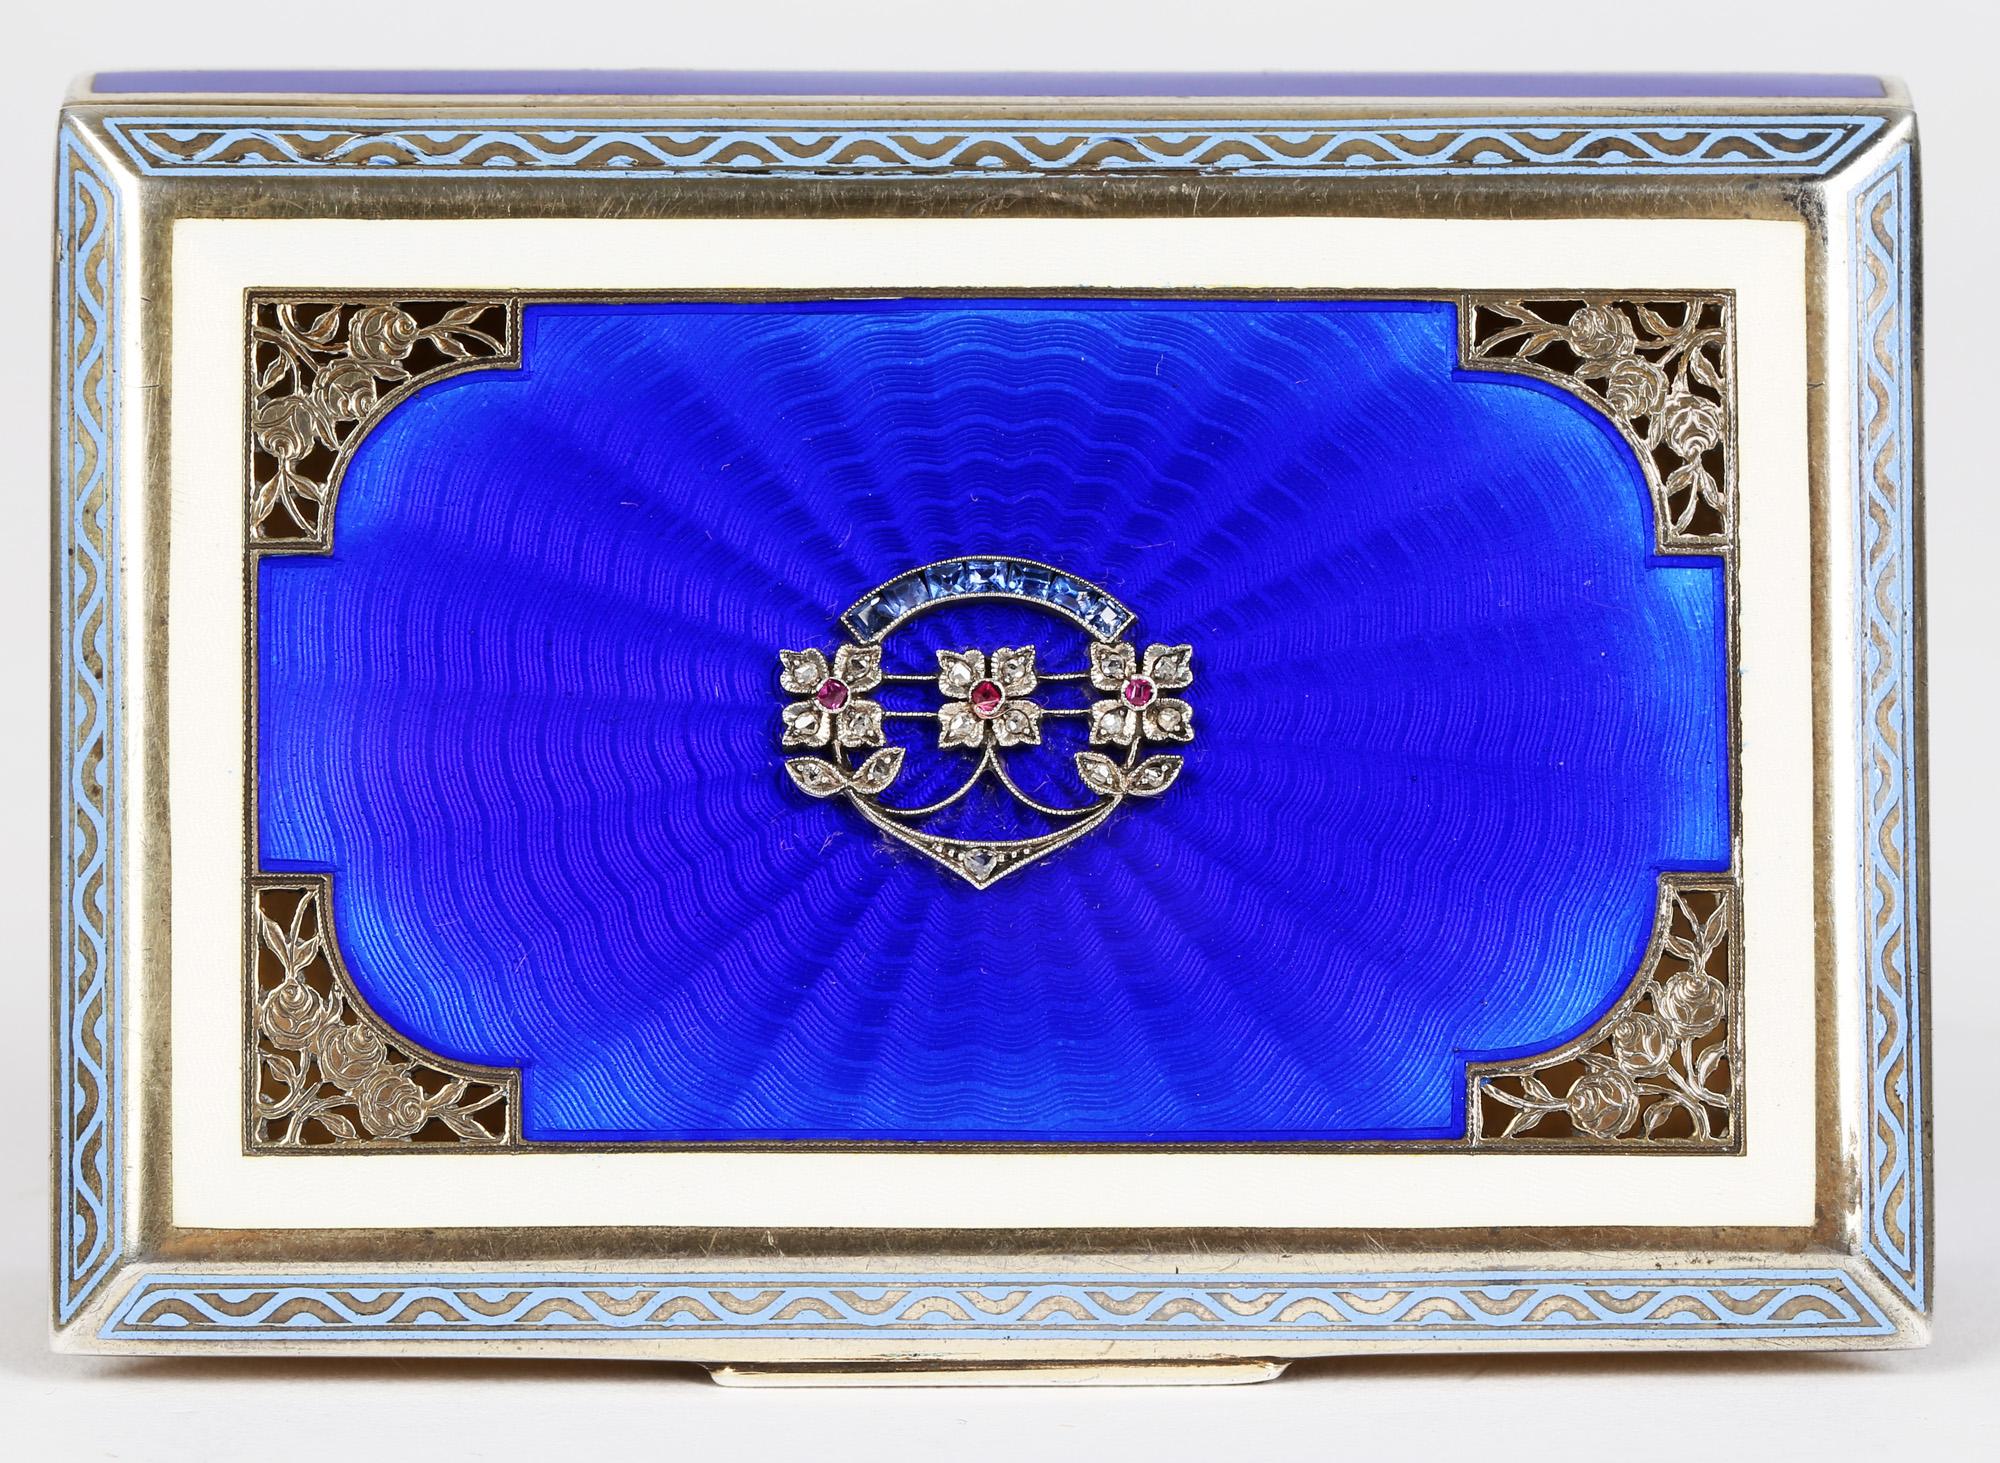 An exceptional quality and heavy gauge Austrian silver gilt guilloche enamel box set with gem stones probably originating from Vienna and made between 1872 and 1922. The box of flat rectangular shaped has inset rich blue enamel panels around the